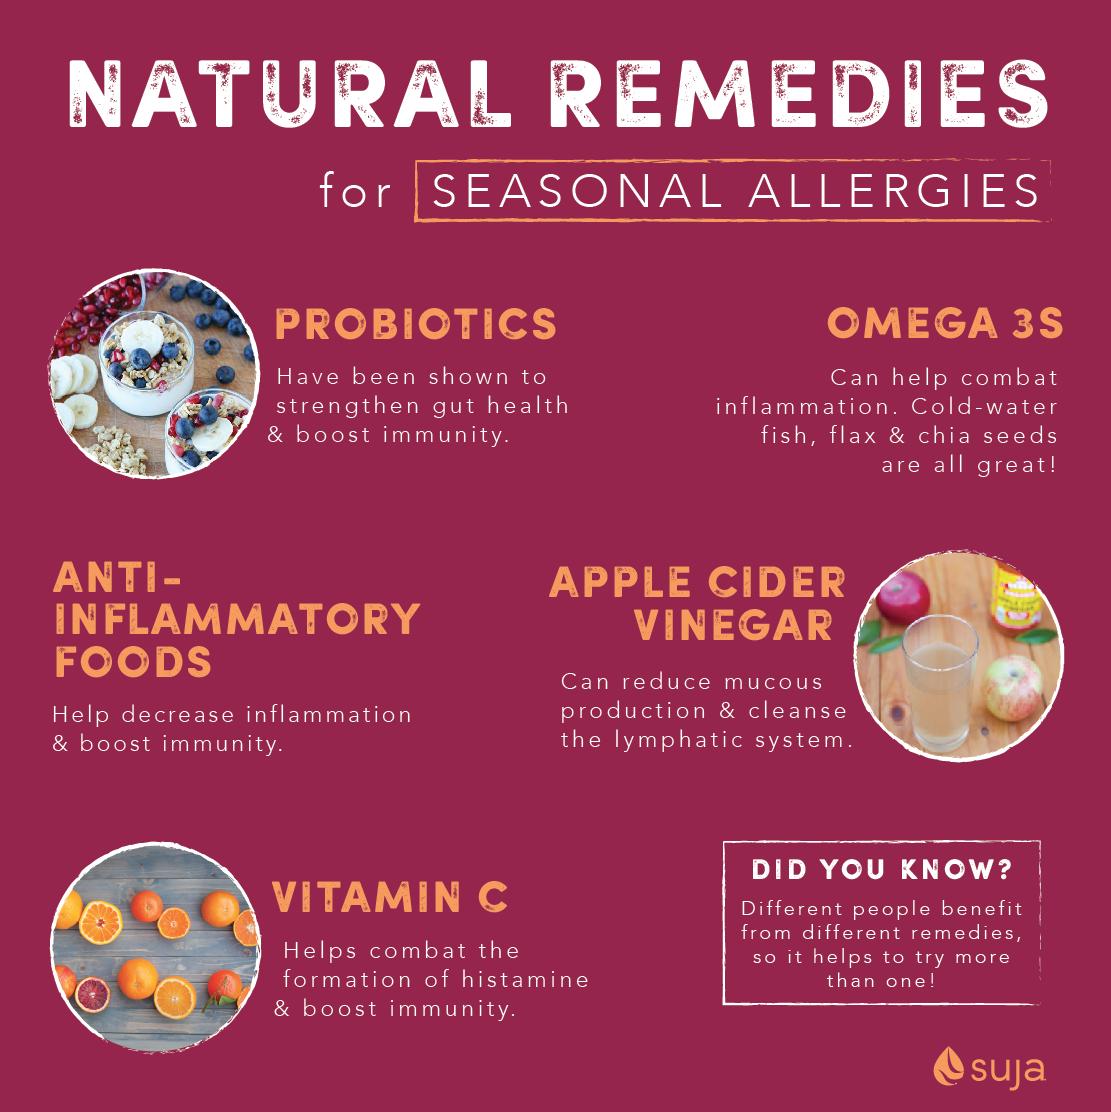 11 Natural Remedies for Seasonal Allergies to Help You Find Relief